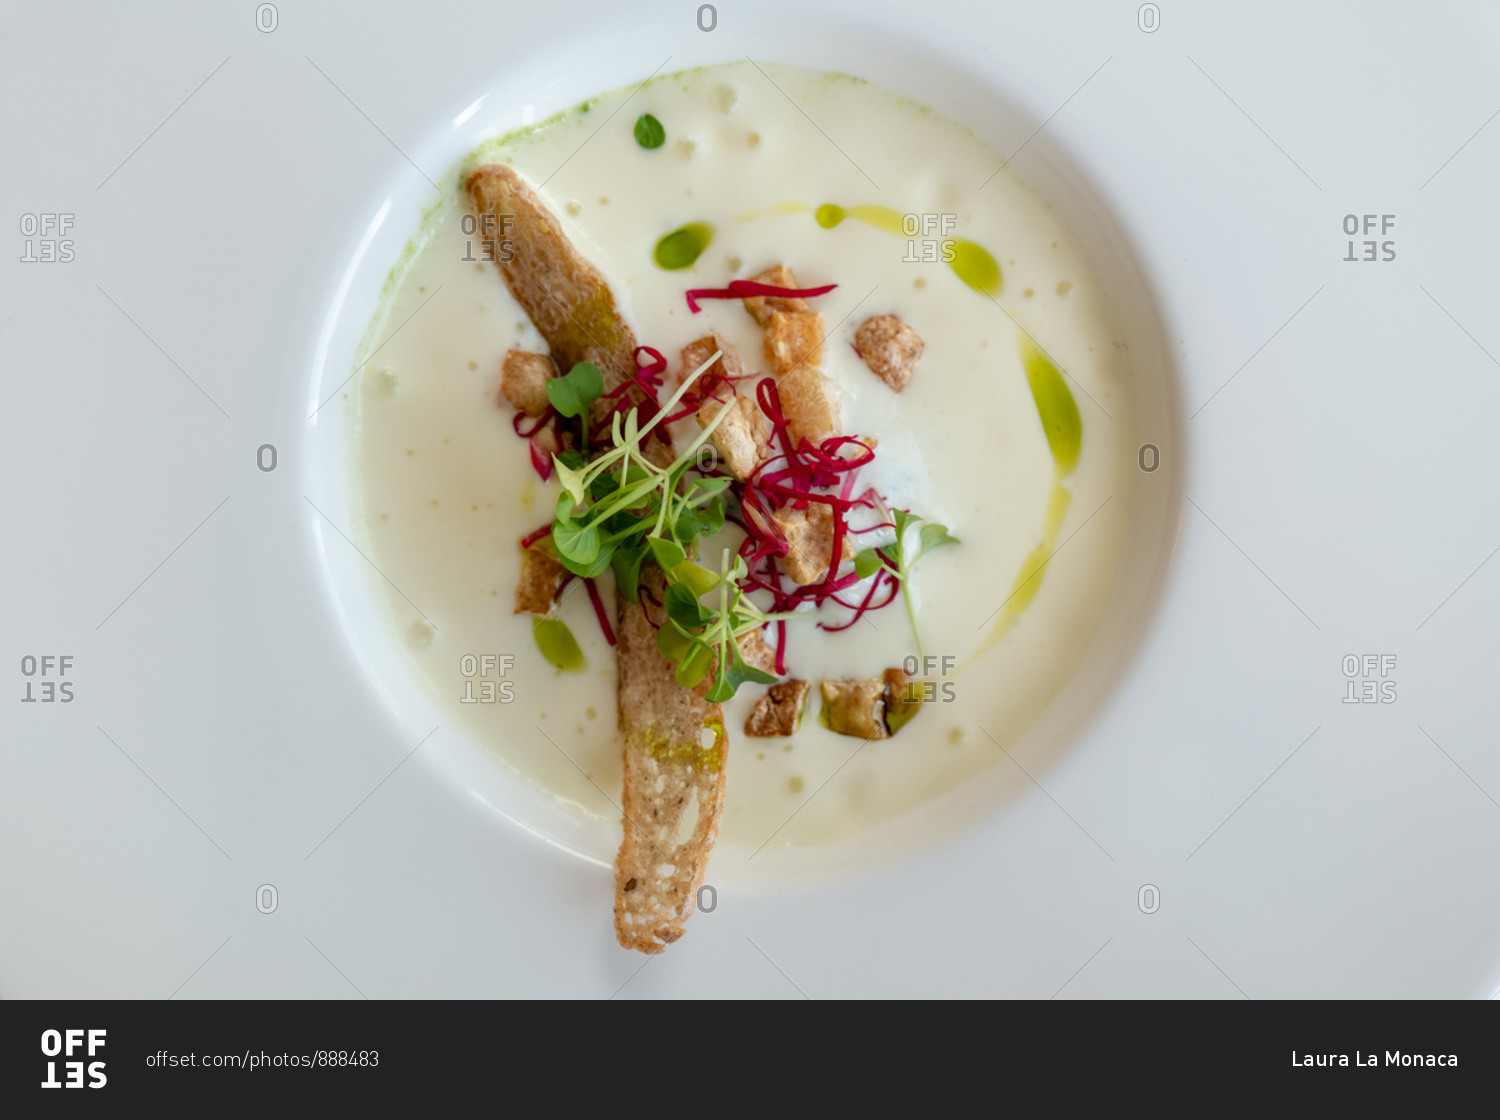 Overhead view of a delicious chowder, South Tyrol, Italy